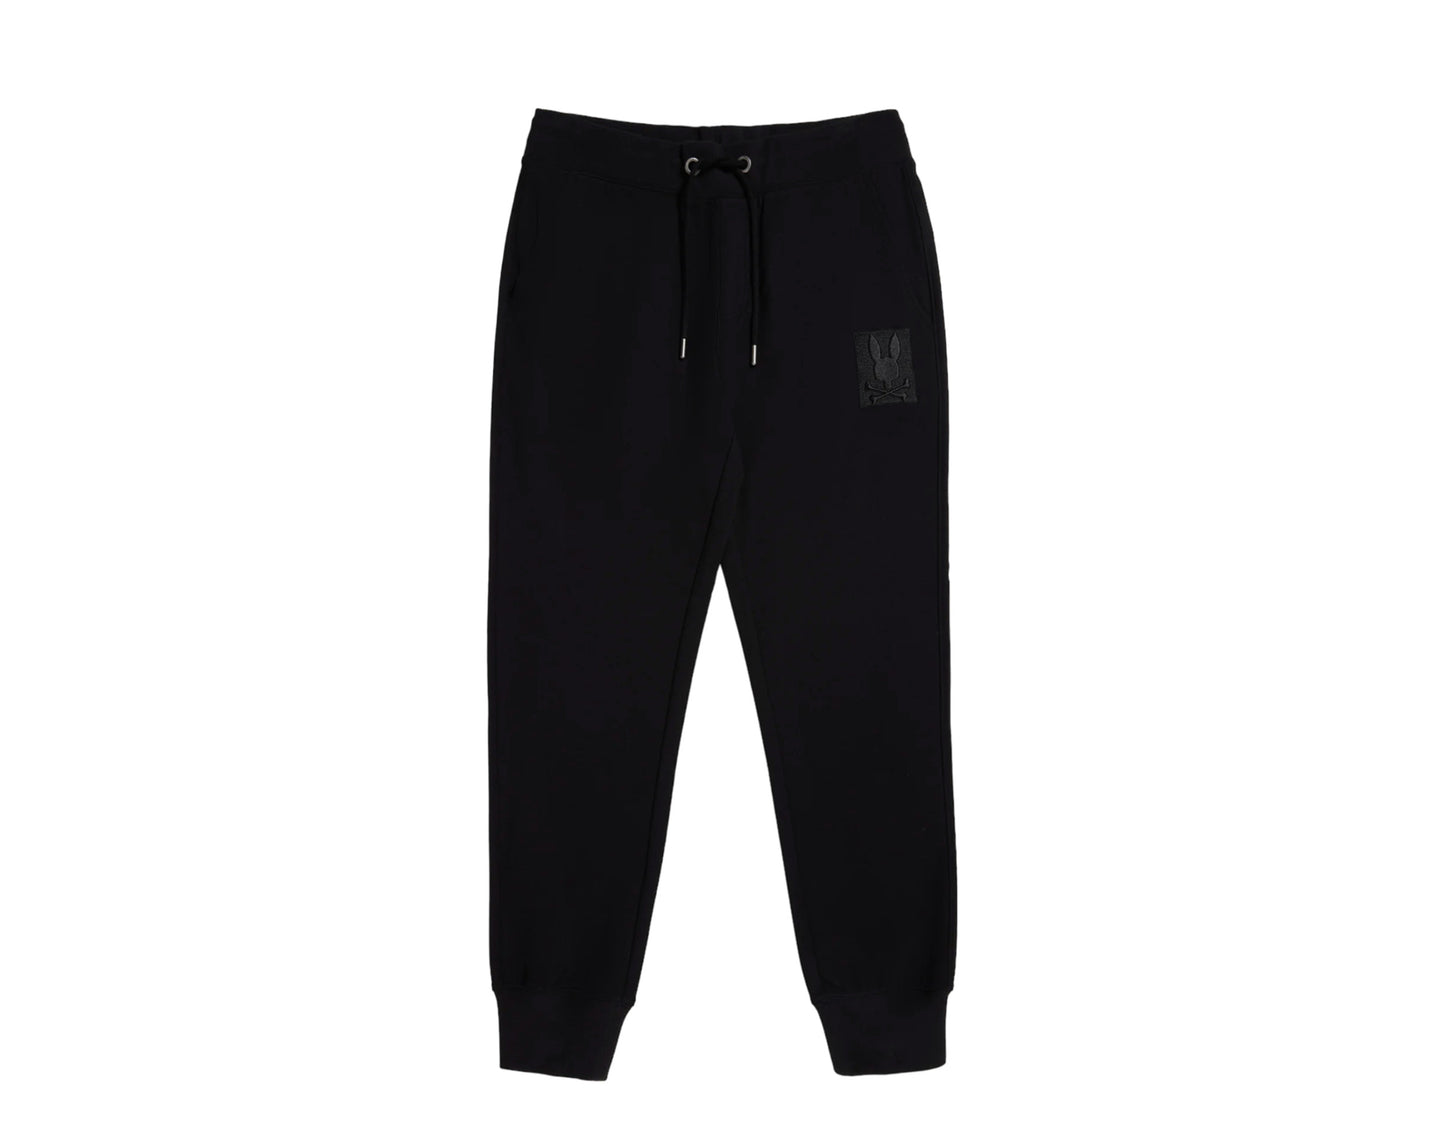 Psycho Bunny Yorkville Embroidered Men's Sweatpants